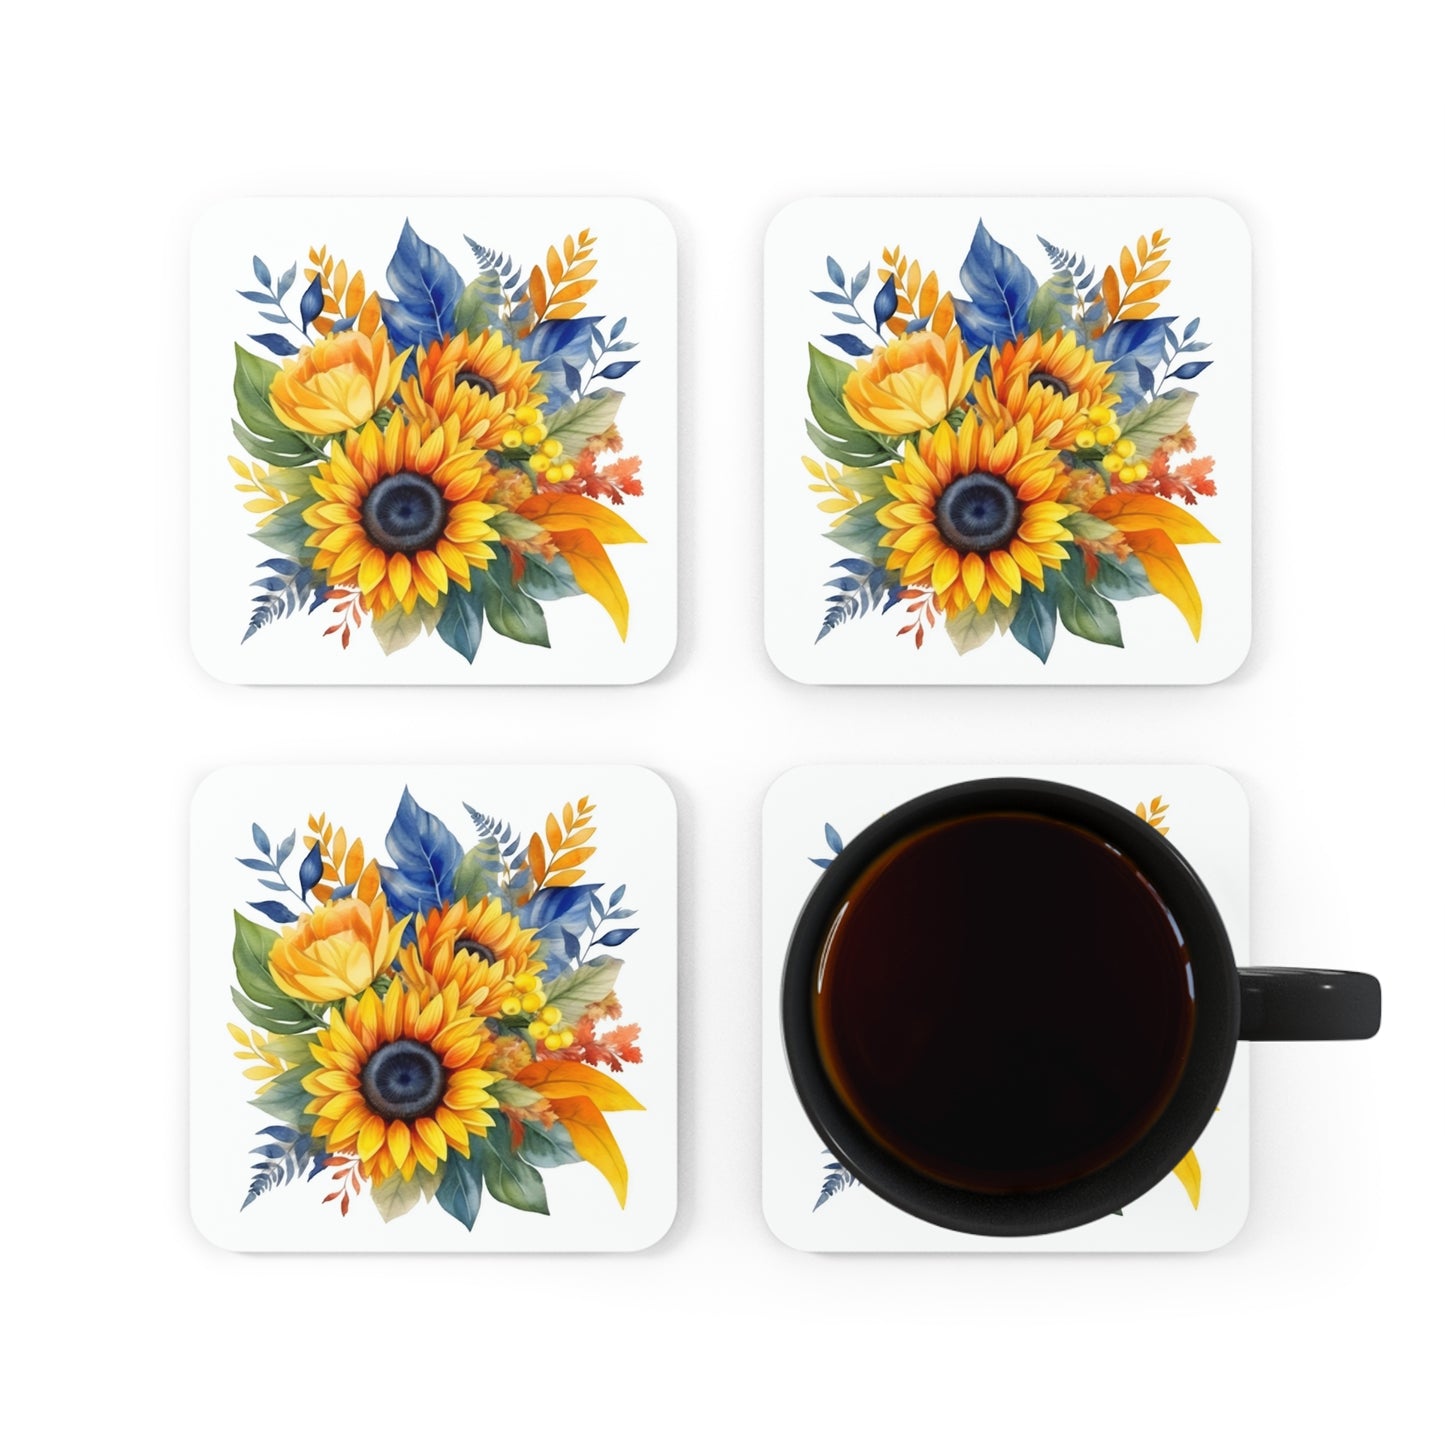 Sunflower Coaster Set of 4, Watercolor Sunflowers Coasters, Floral Square Drink Coasters, Nature Coasters, Cork Bottom, Housewarming Gift